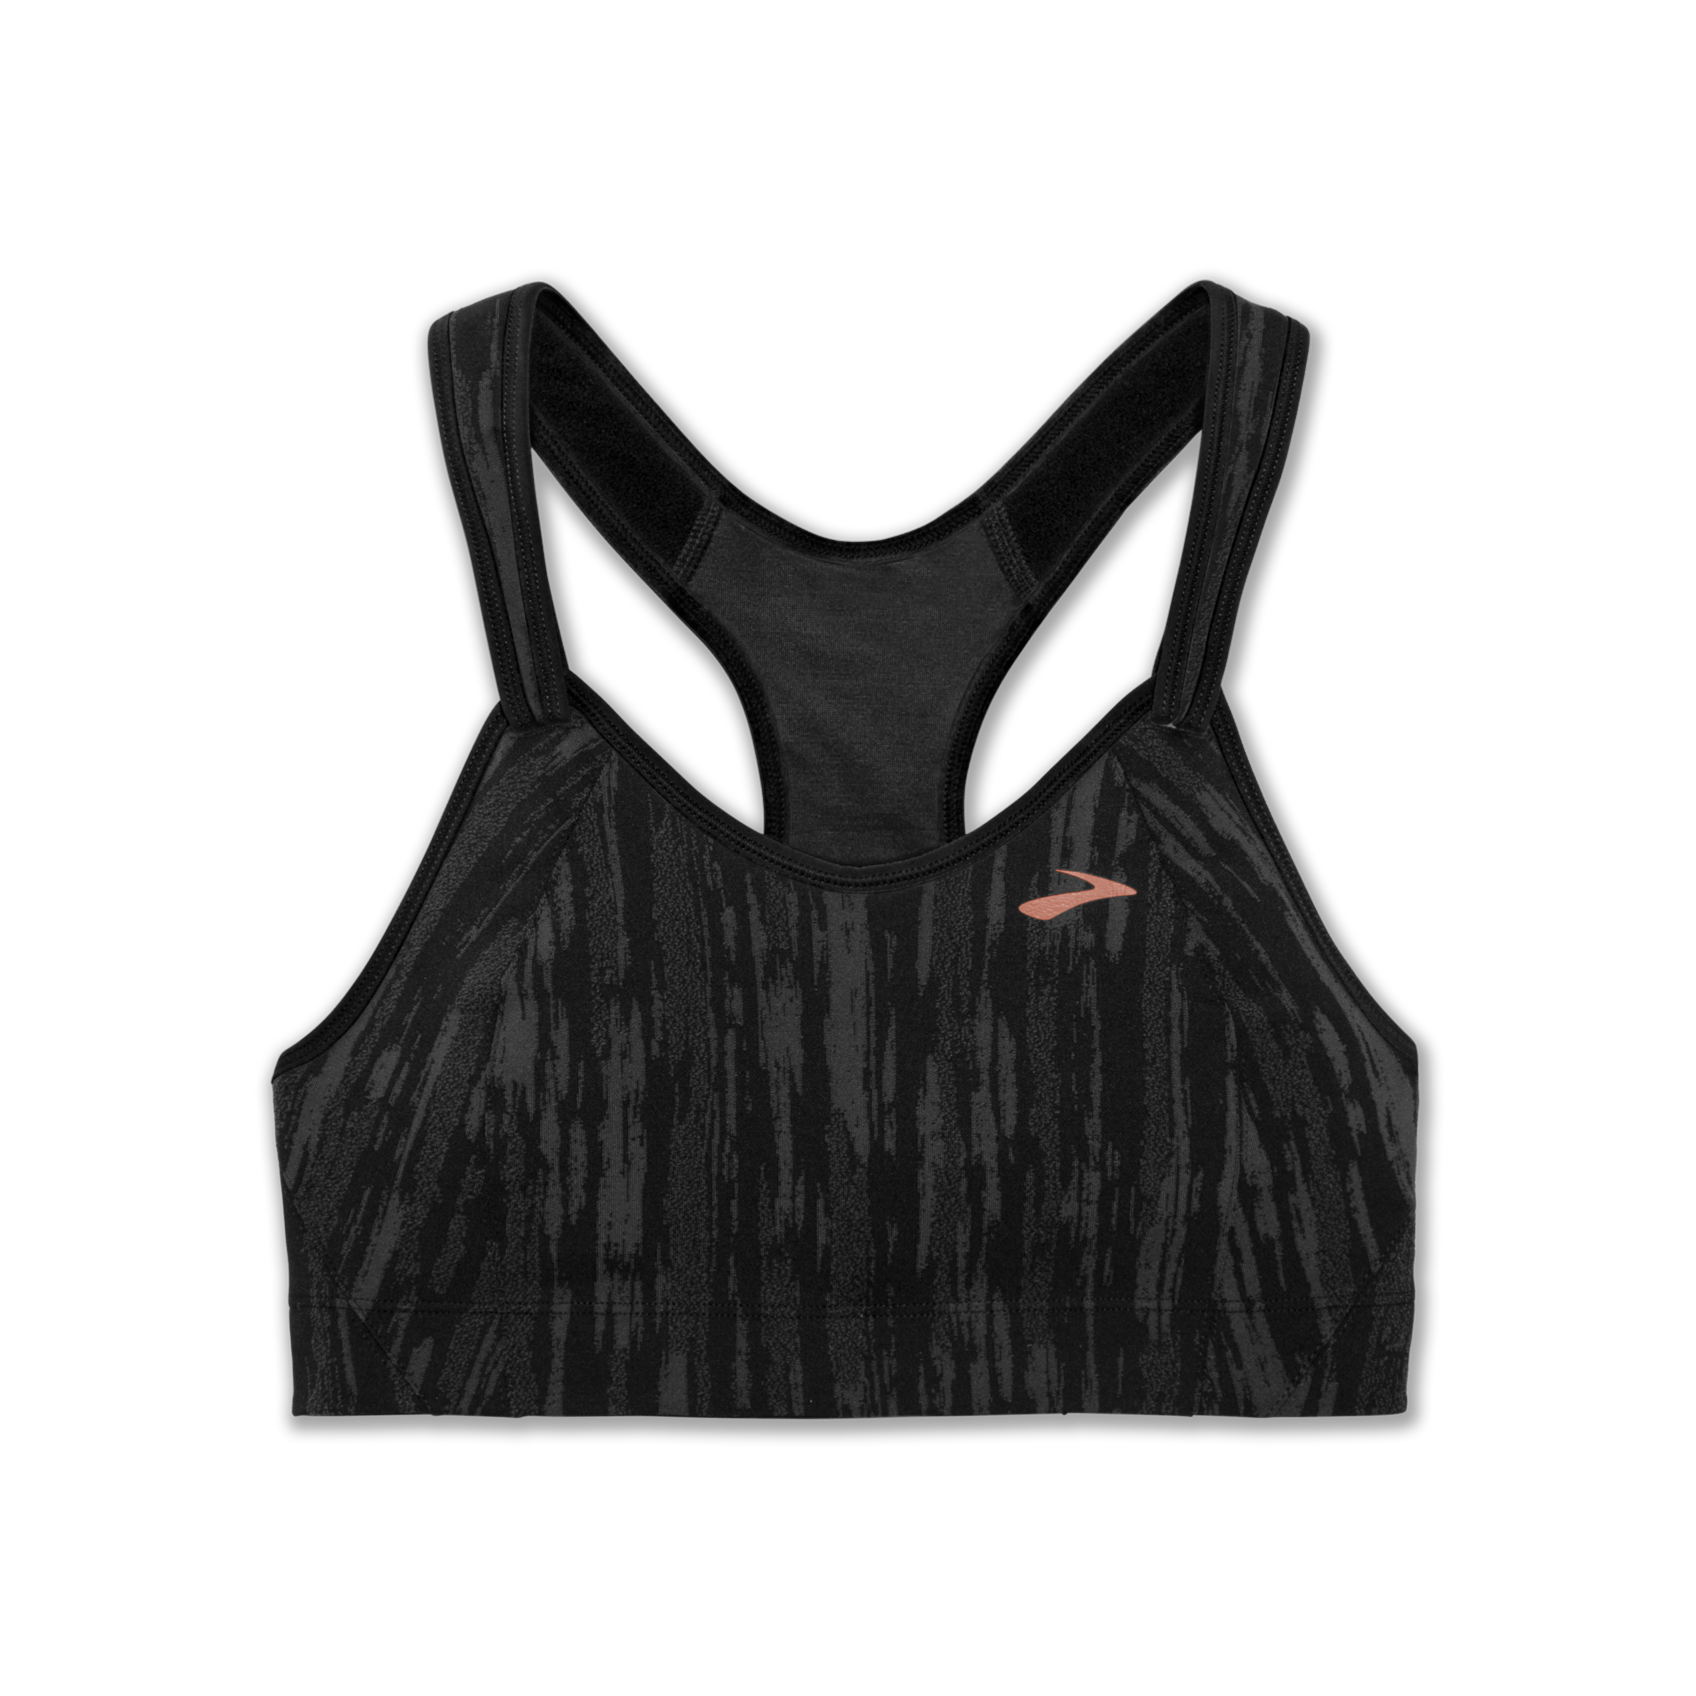 Women's High Support Embossed Racerback Run Sports Bra - All in Motion  Black XL 1 ct